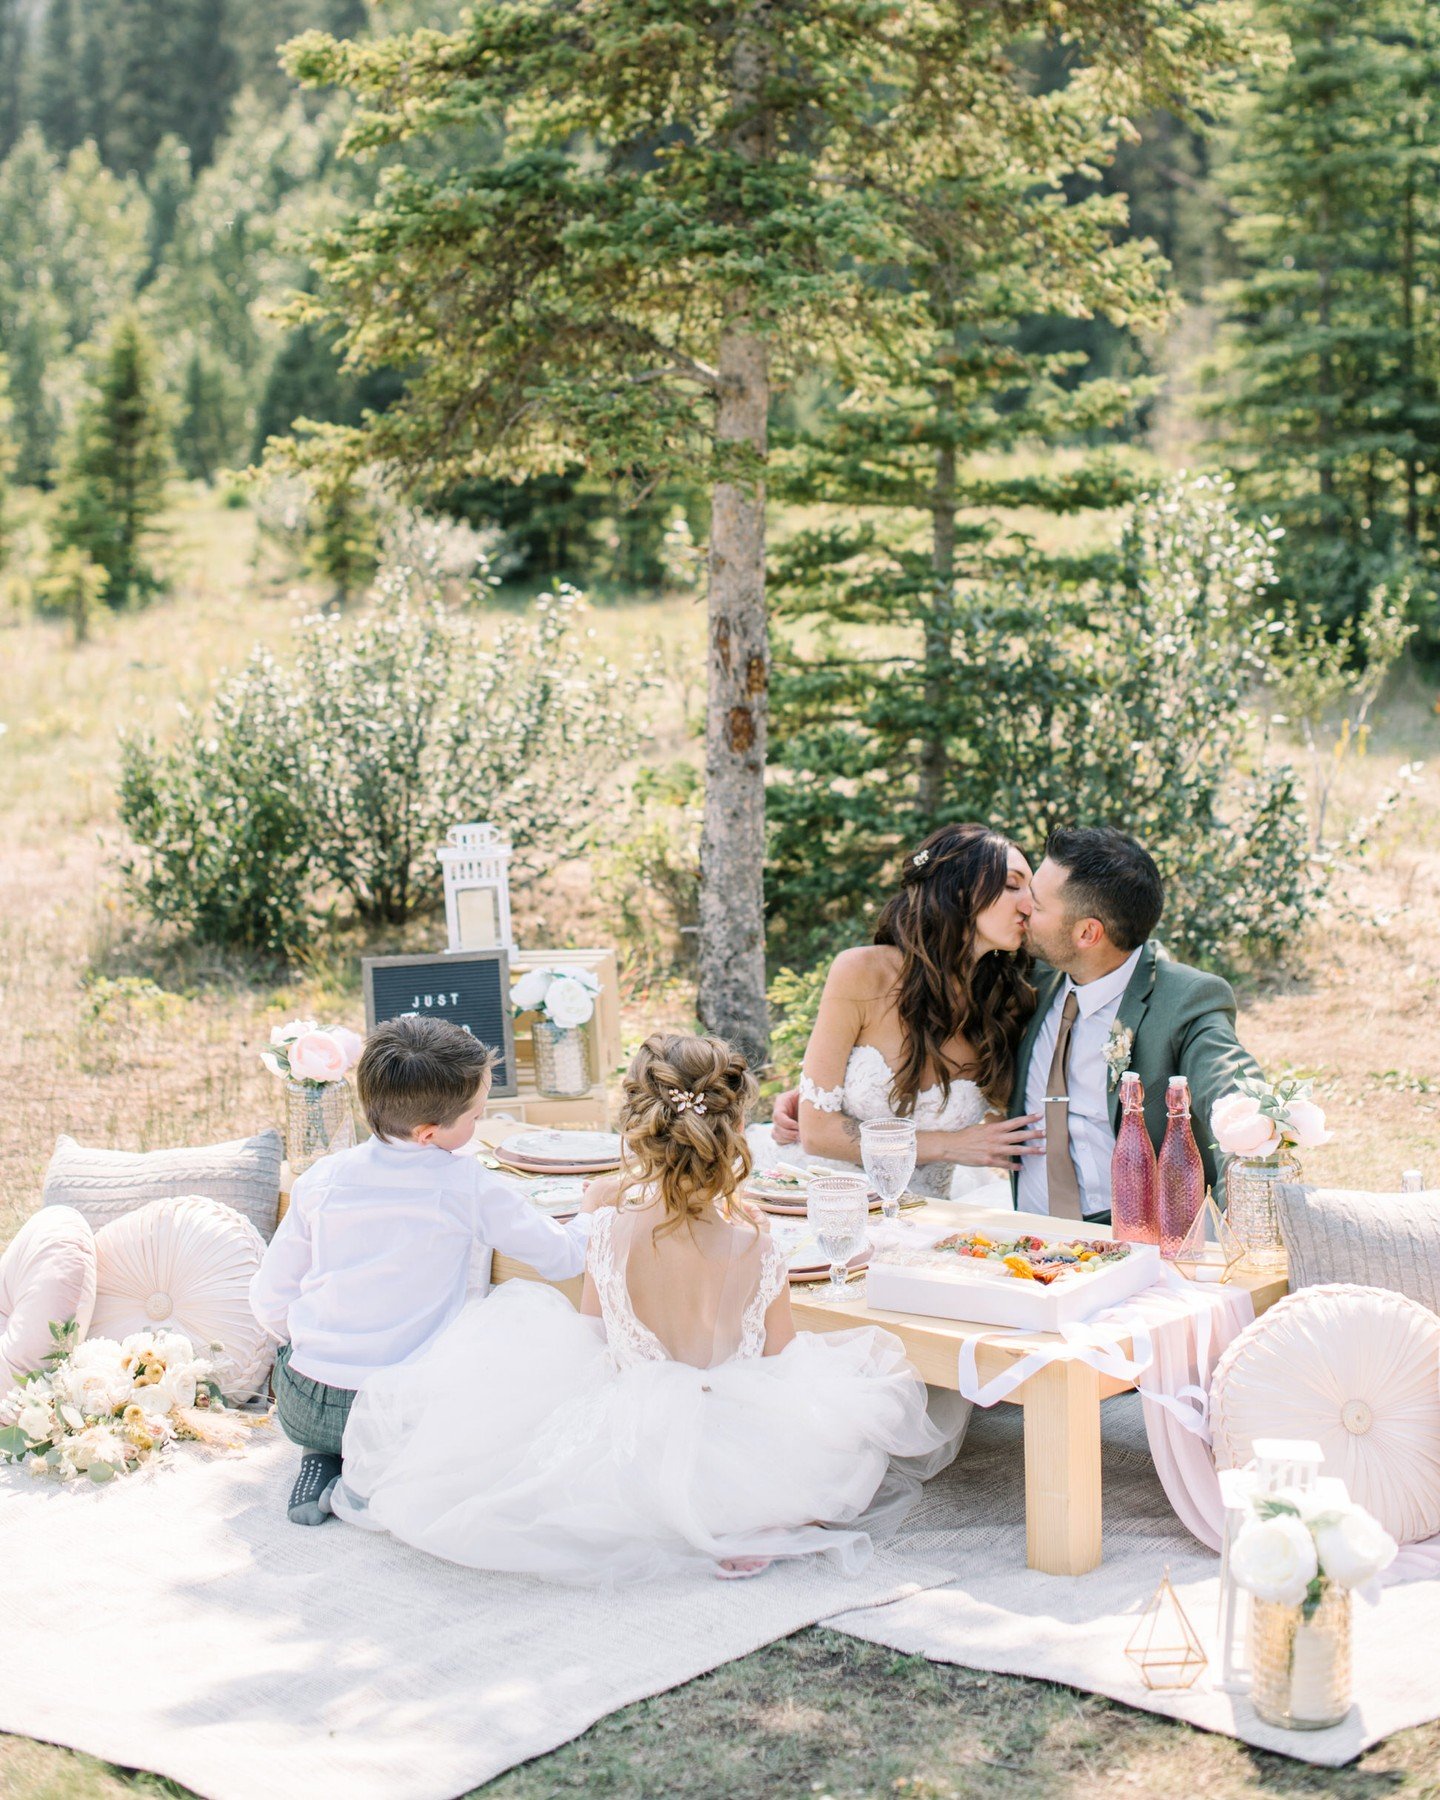 The joining of two families and the cutest elopement picnic. 
#canmoreelopement #intimatewedding 
#picnicwedding